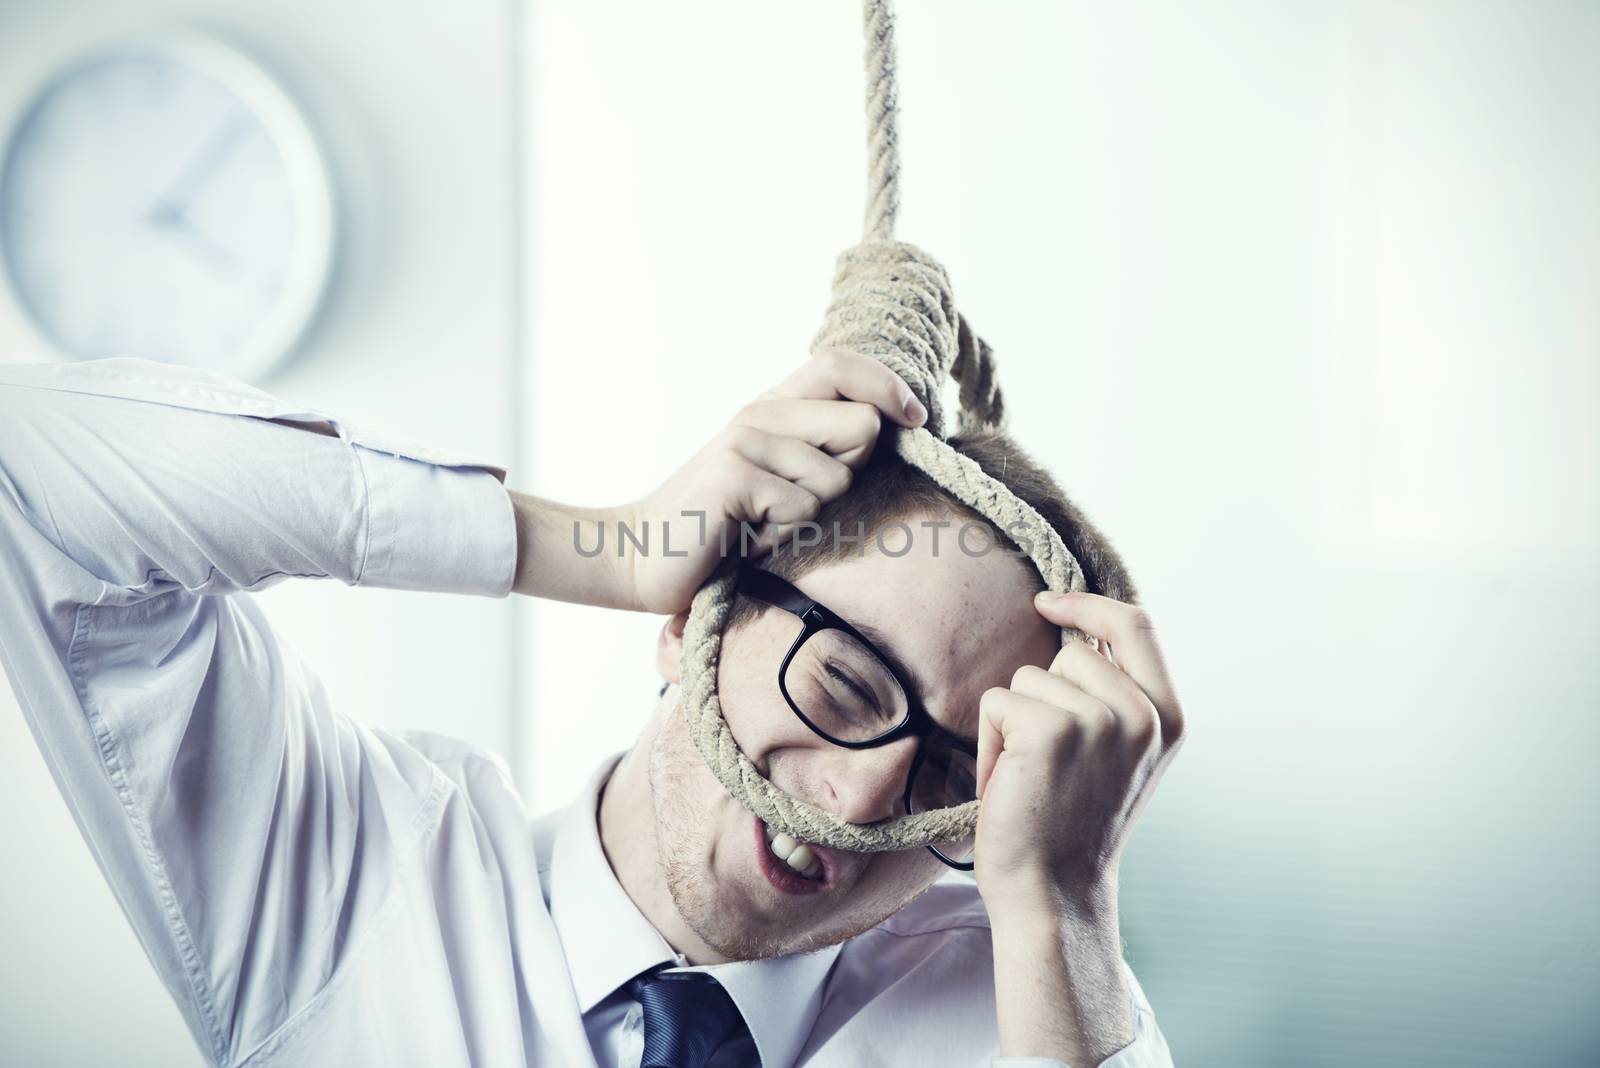 A office worker is setting up a noose